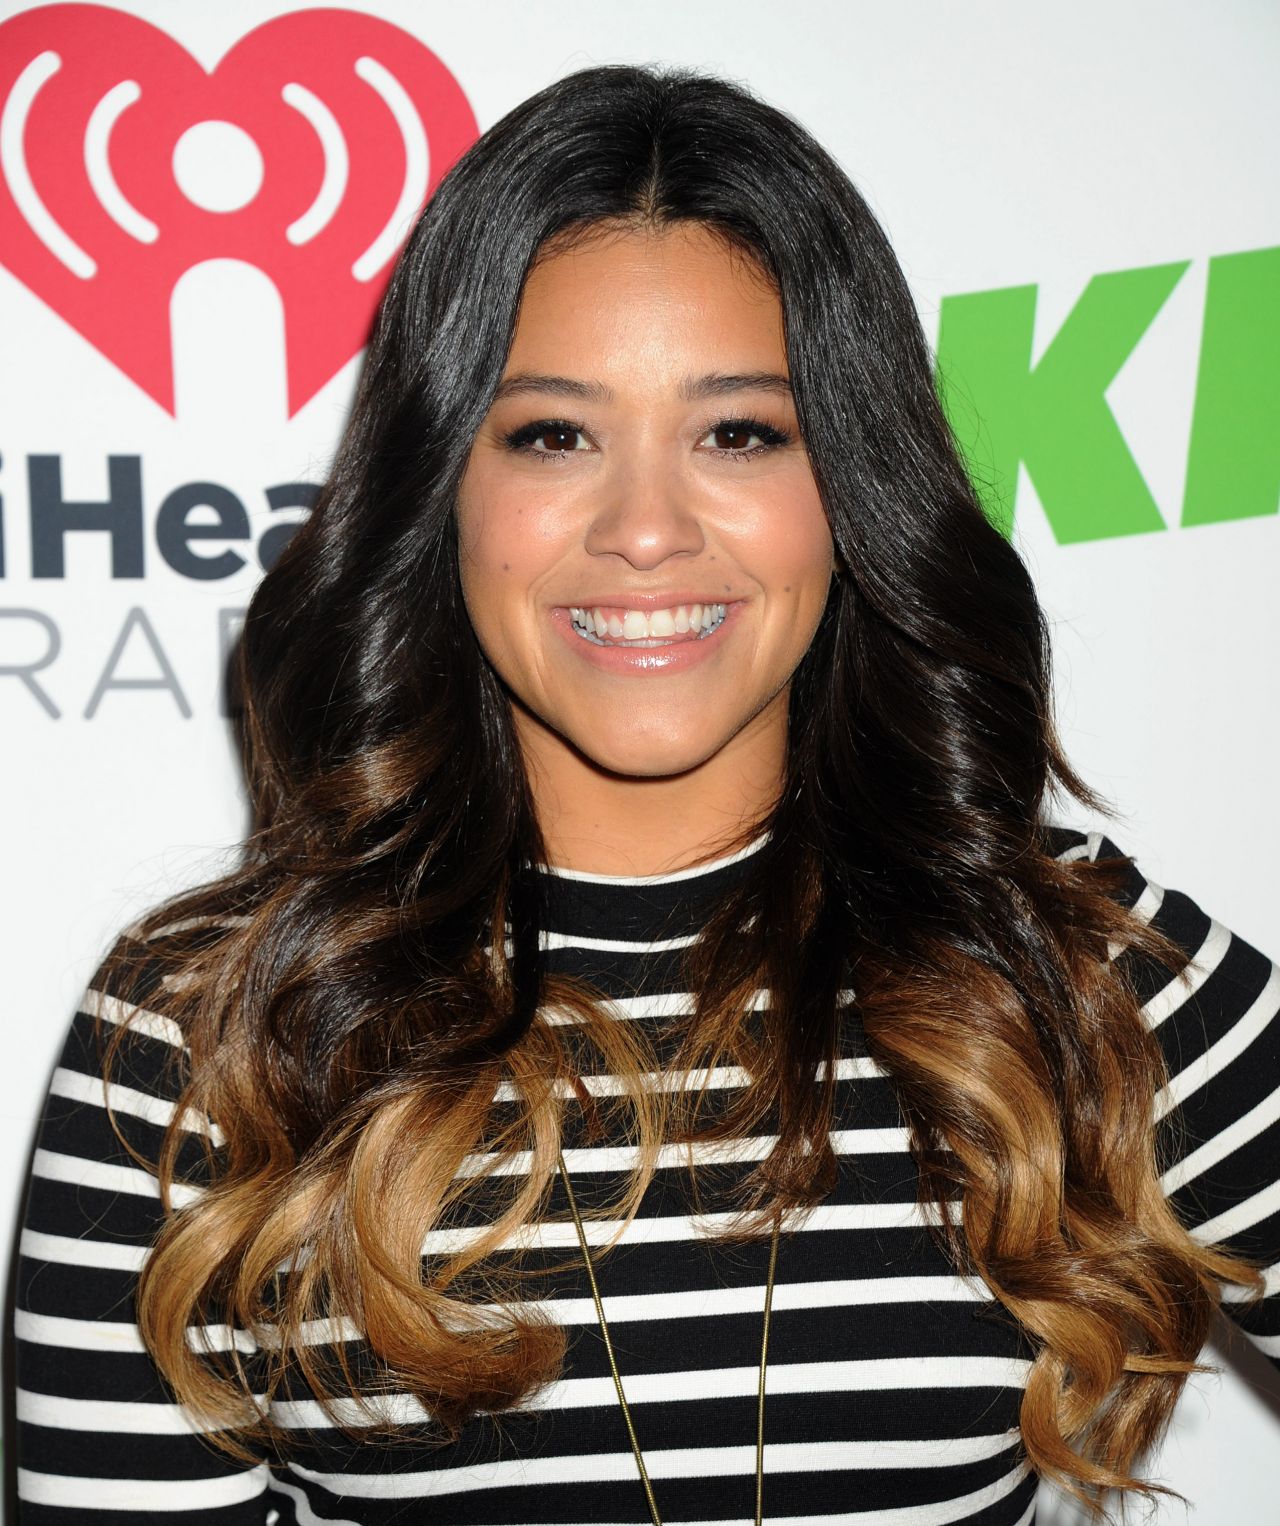 Gina Rodriguez - 2014 KIIS FM’s Jingle Ball at Staples Center in Los Angele...